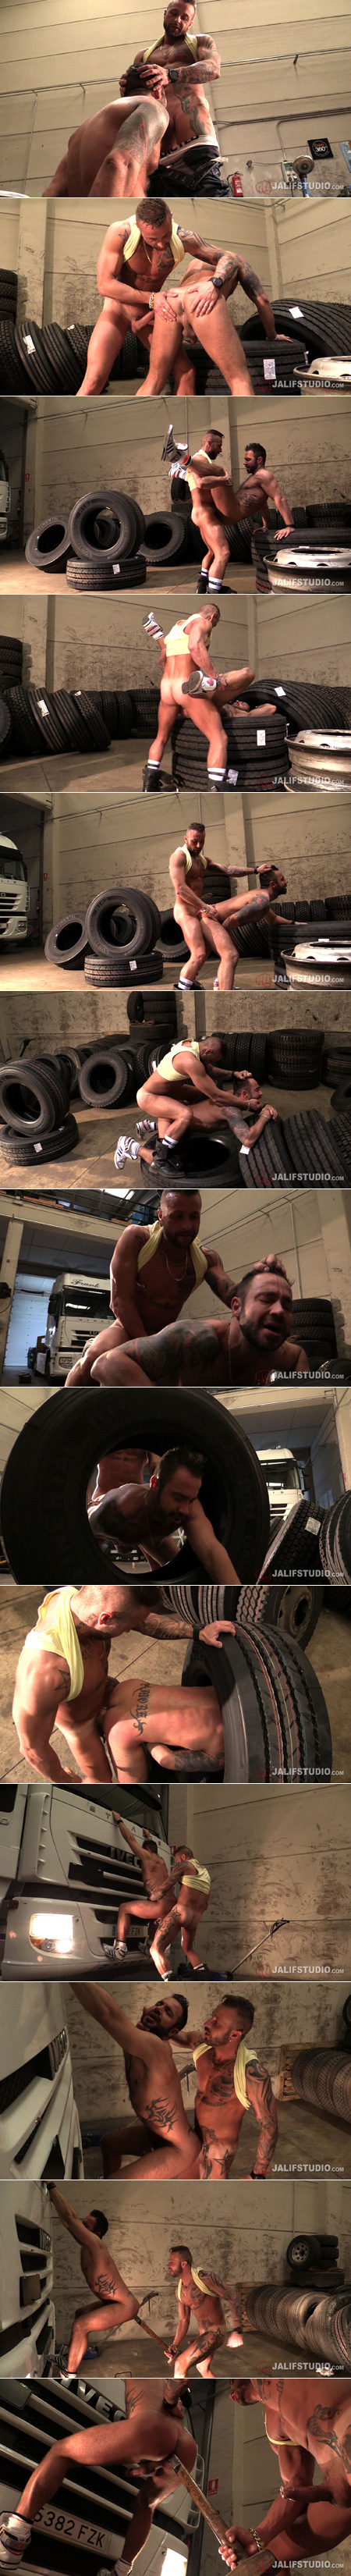 Hairy muscle guy getting fucked in a commerical garage by a dominant semi truck driver with a sledgehammer.